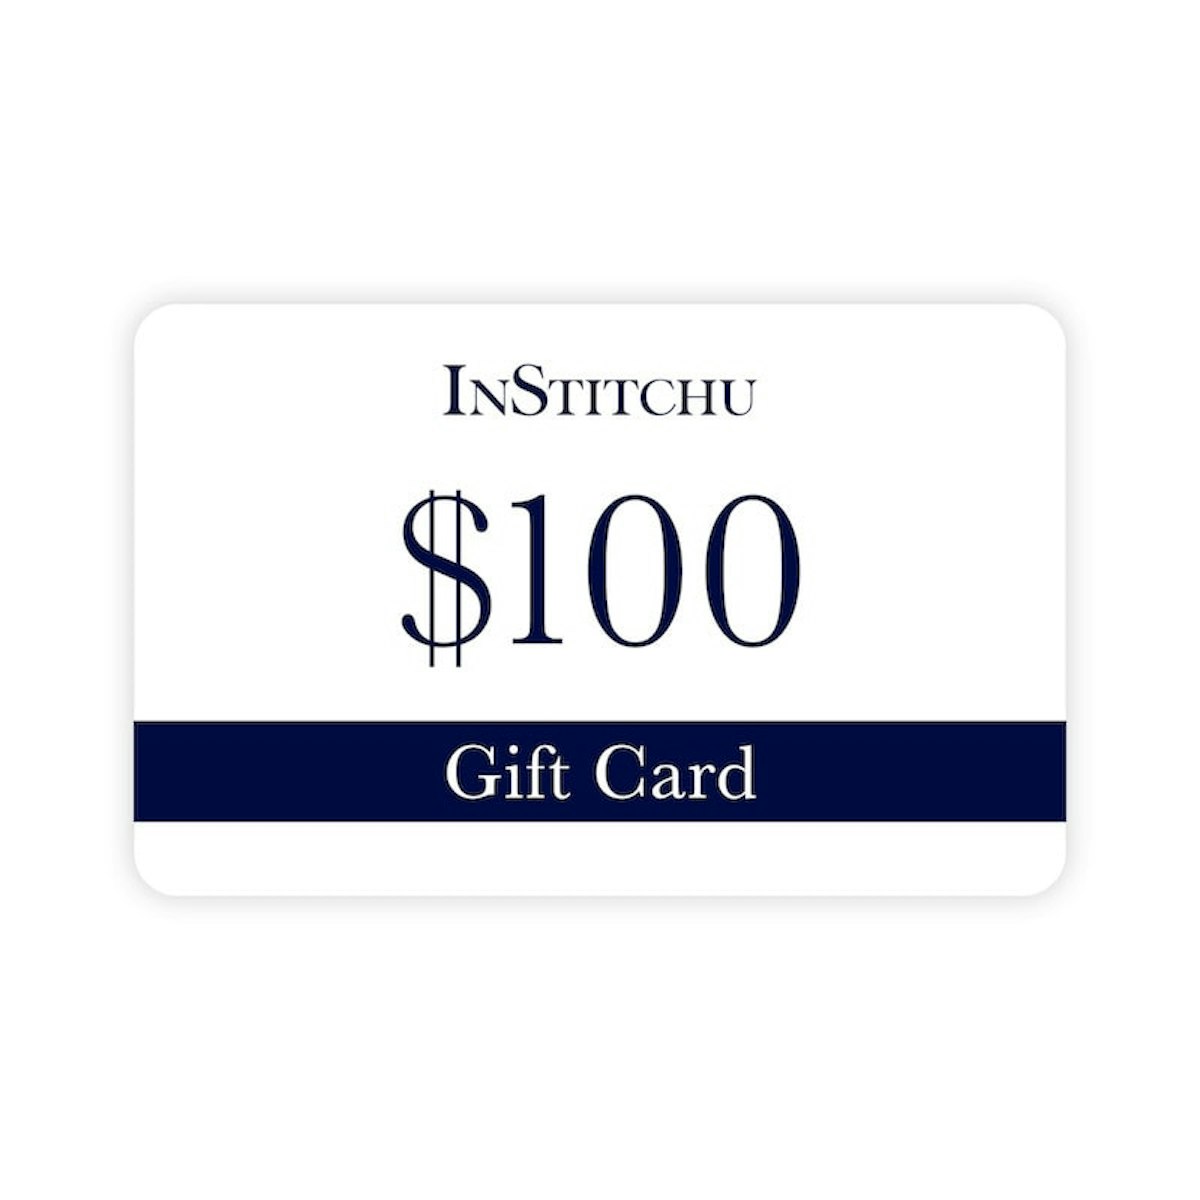 InStitchu Physical Gift Card $100